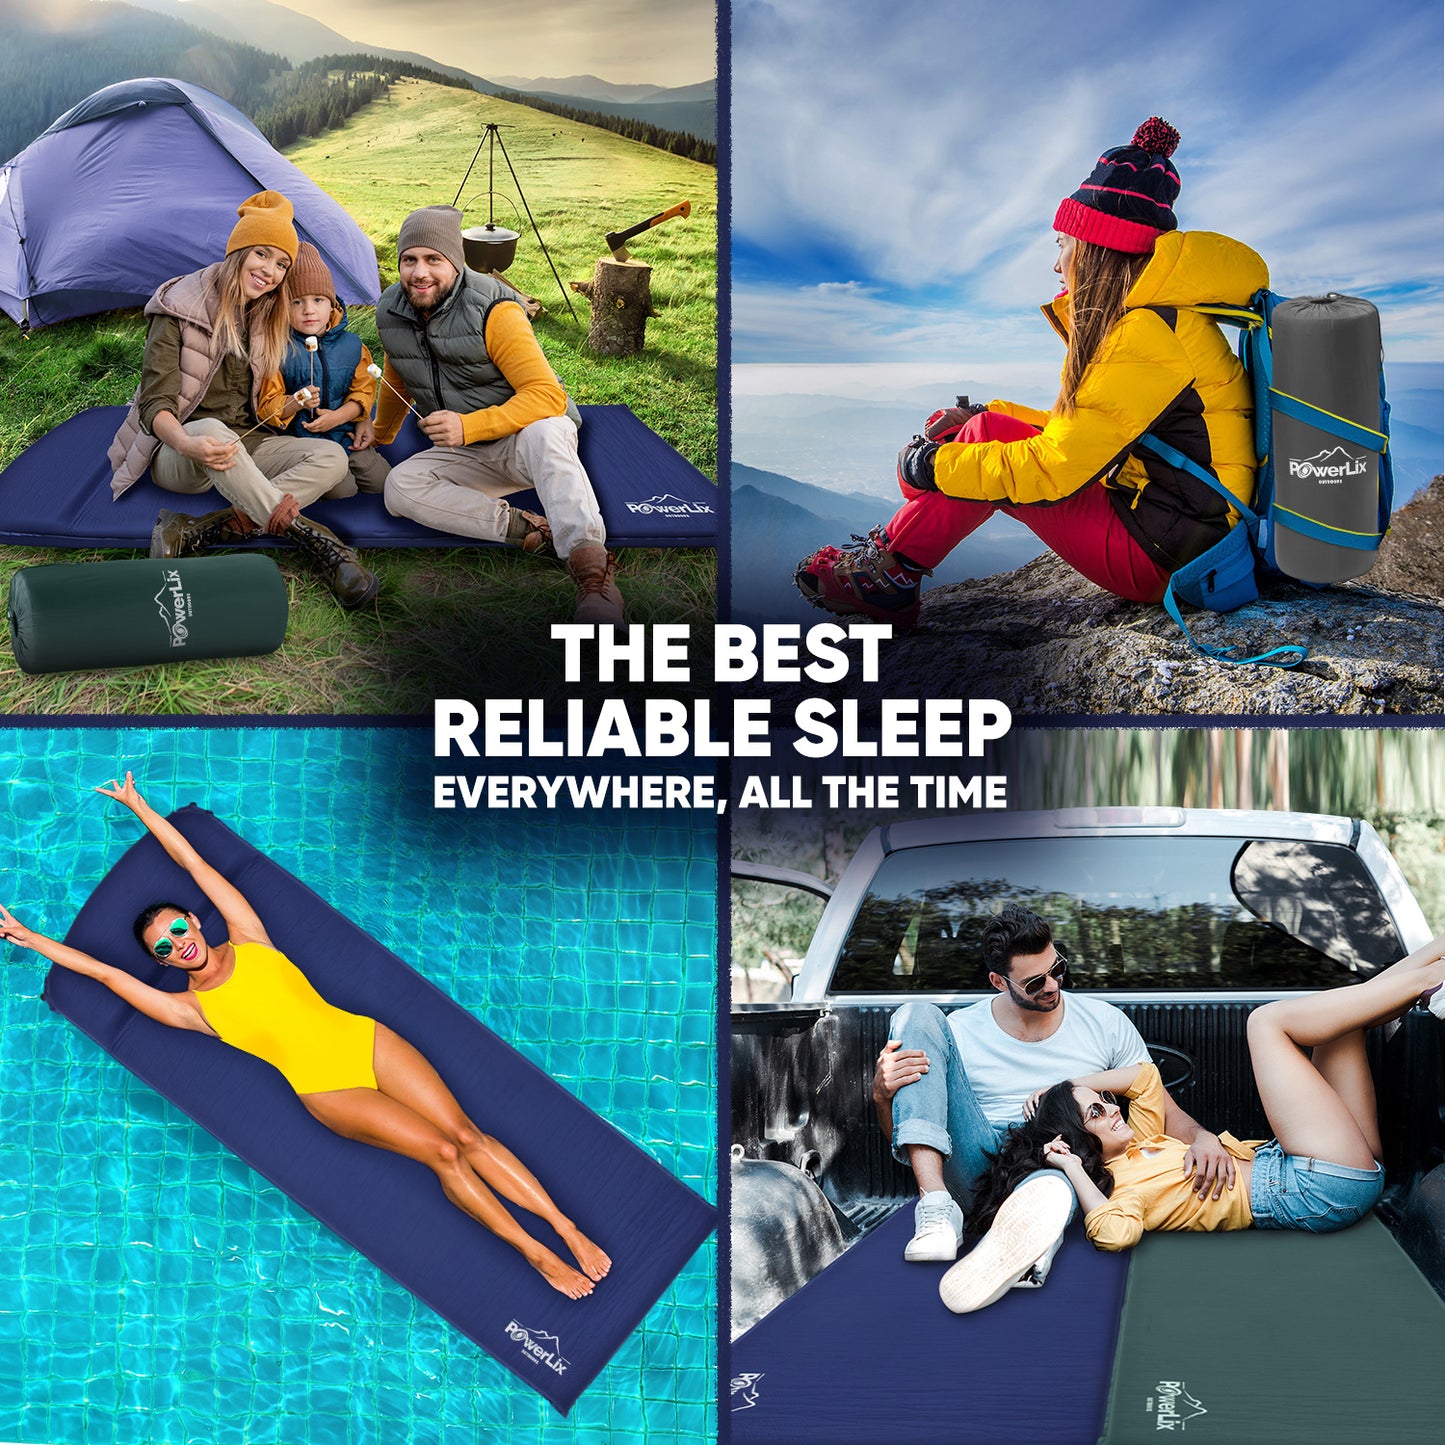 Four images of people using the powerlix sleeping pad. One outdoors while camping, on with the pad stored while hiking, one with the pad in a pool, one with two pads in the bed of a truck. Center text reads, "The best reliable sleep, everywhere, all the time."